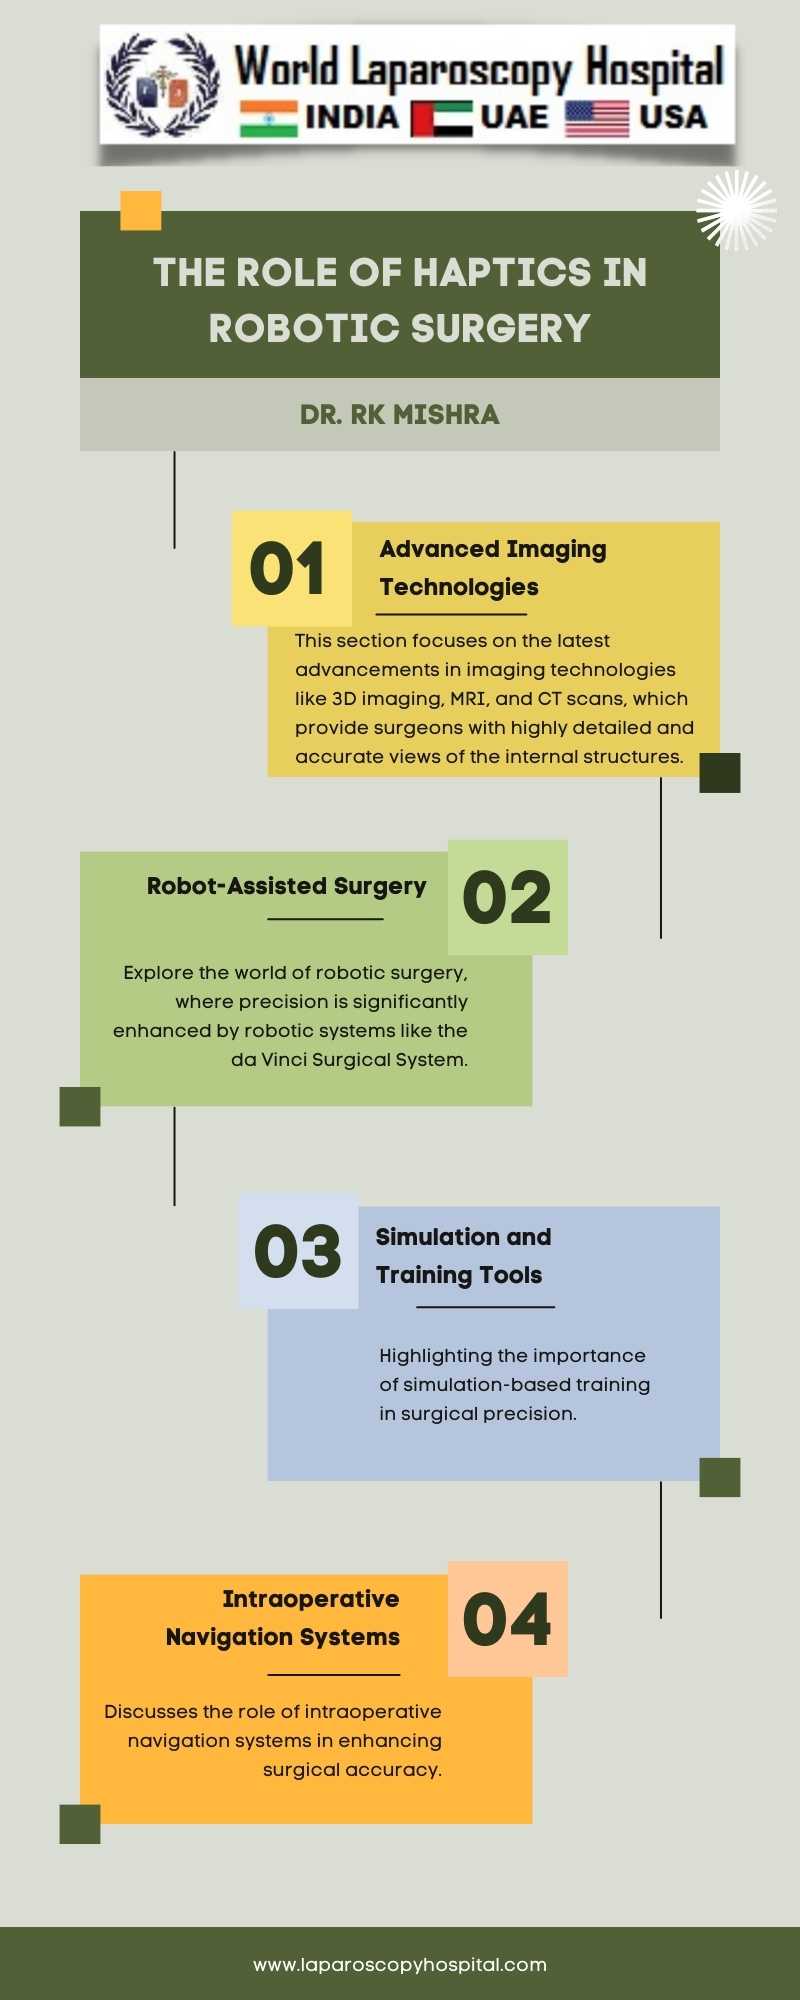 Enhancing Surgical Precision: The Role of Haptics in Robotic Surgery